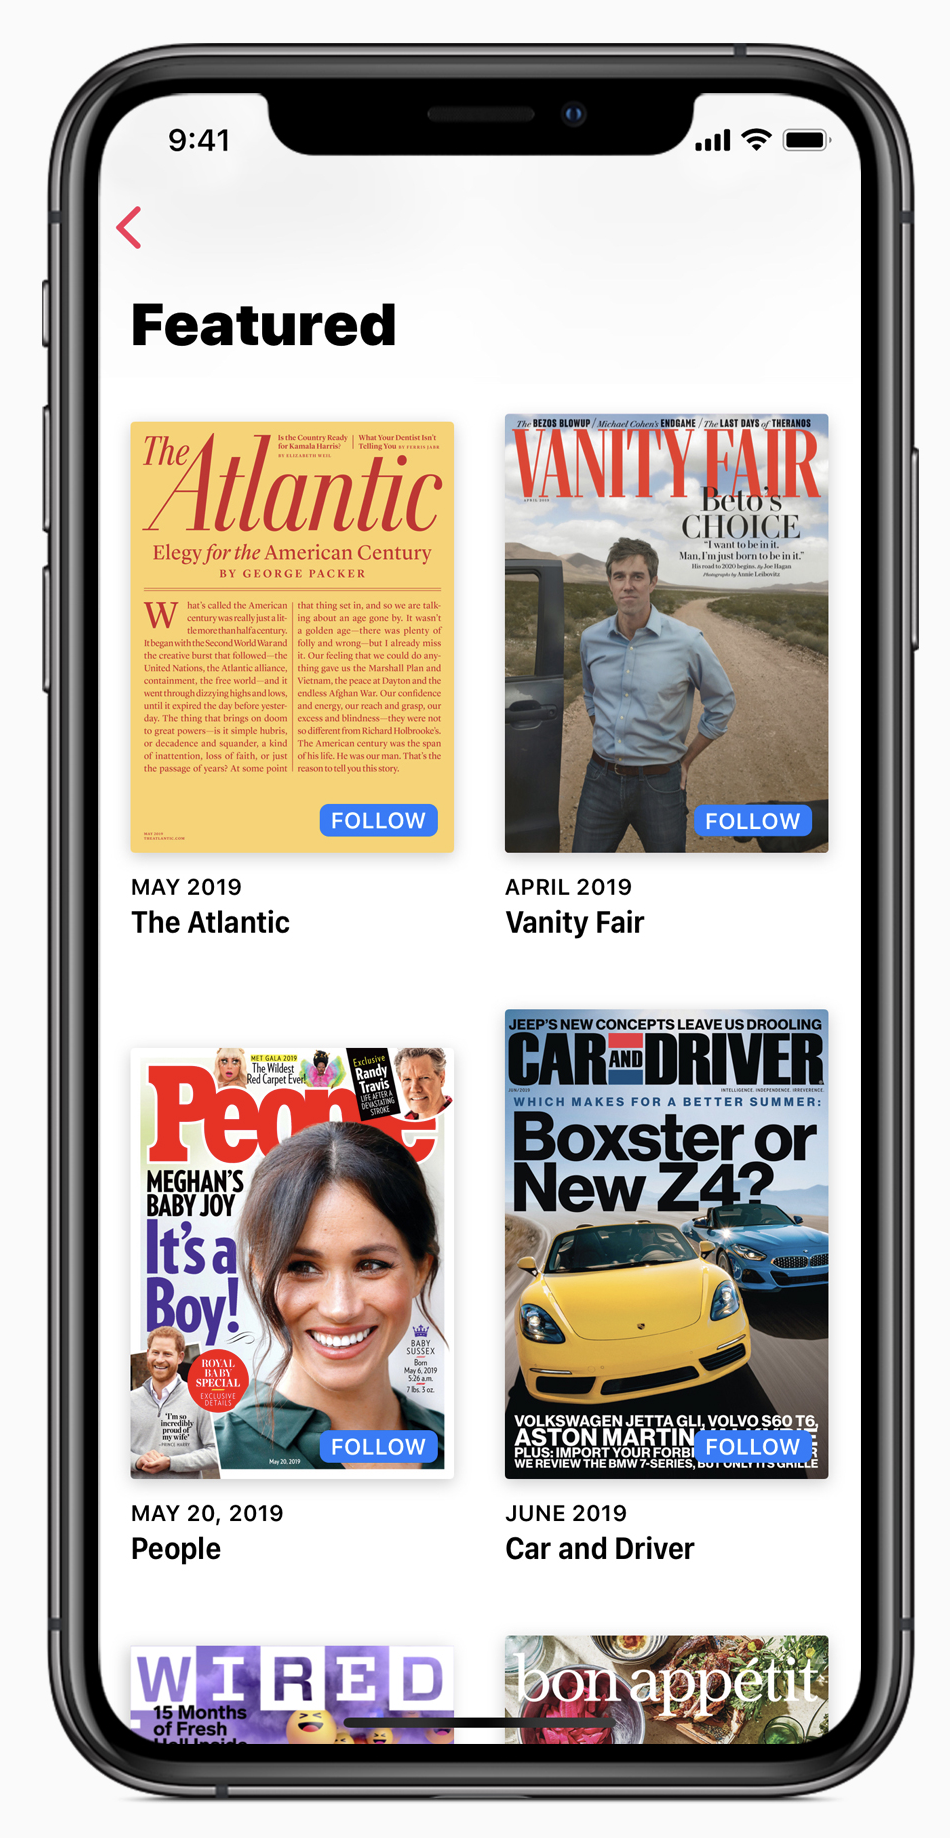 Apple News+ offering exclusive covers